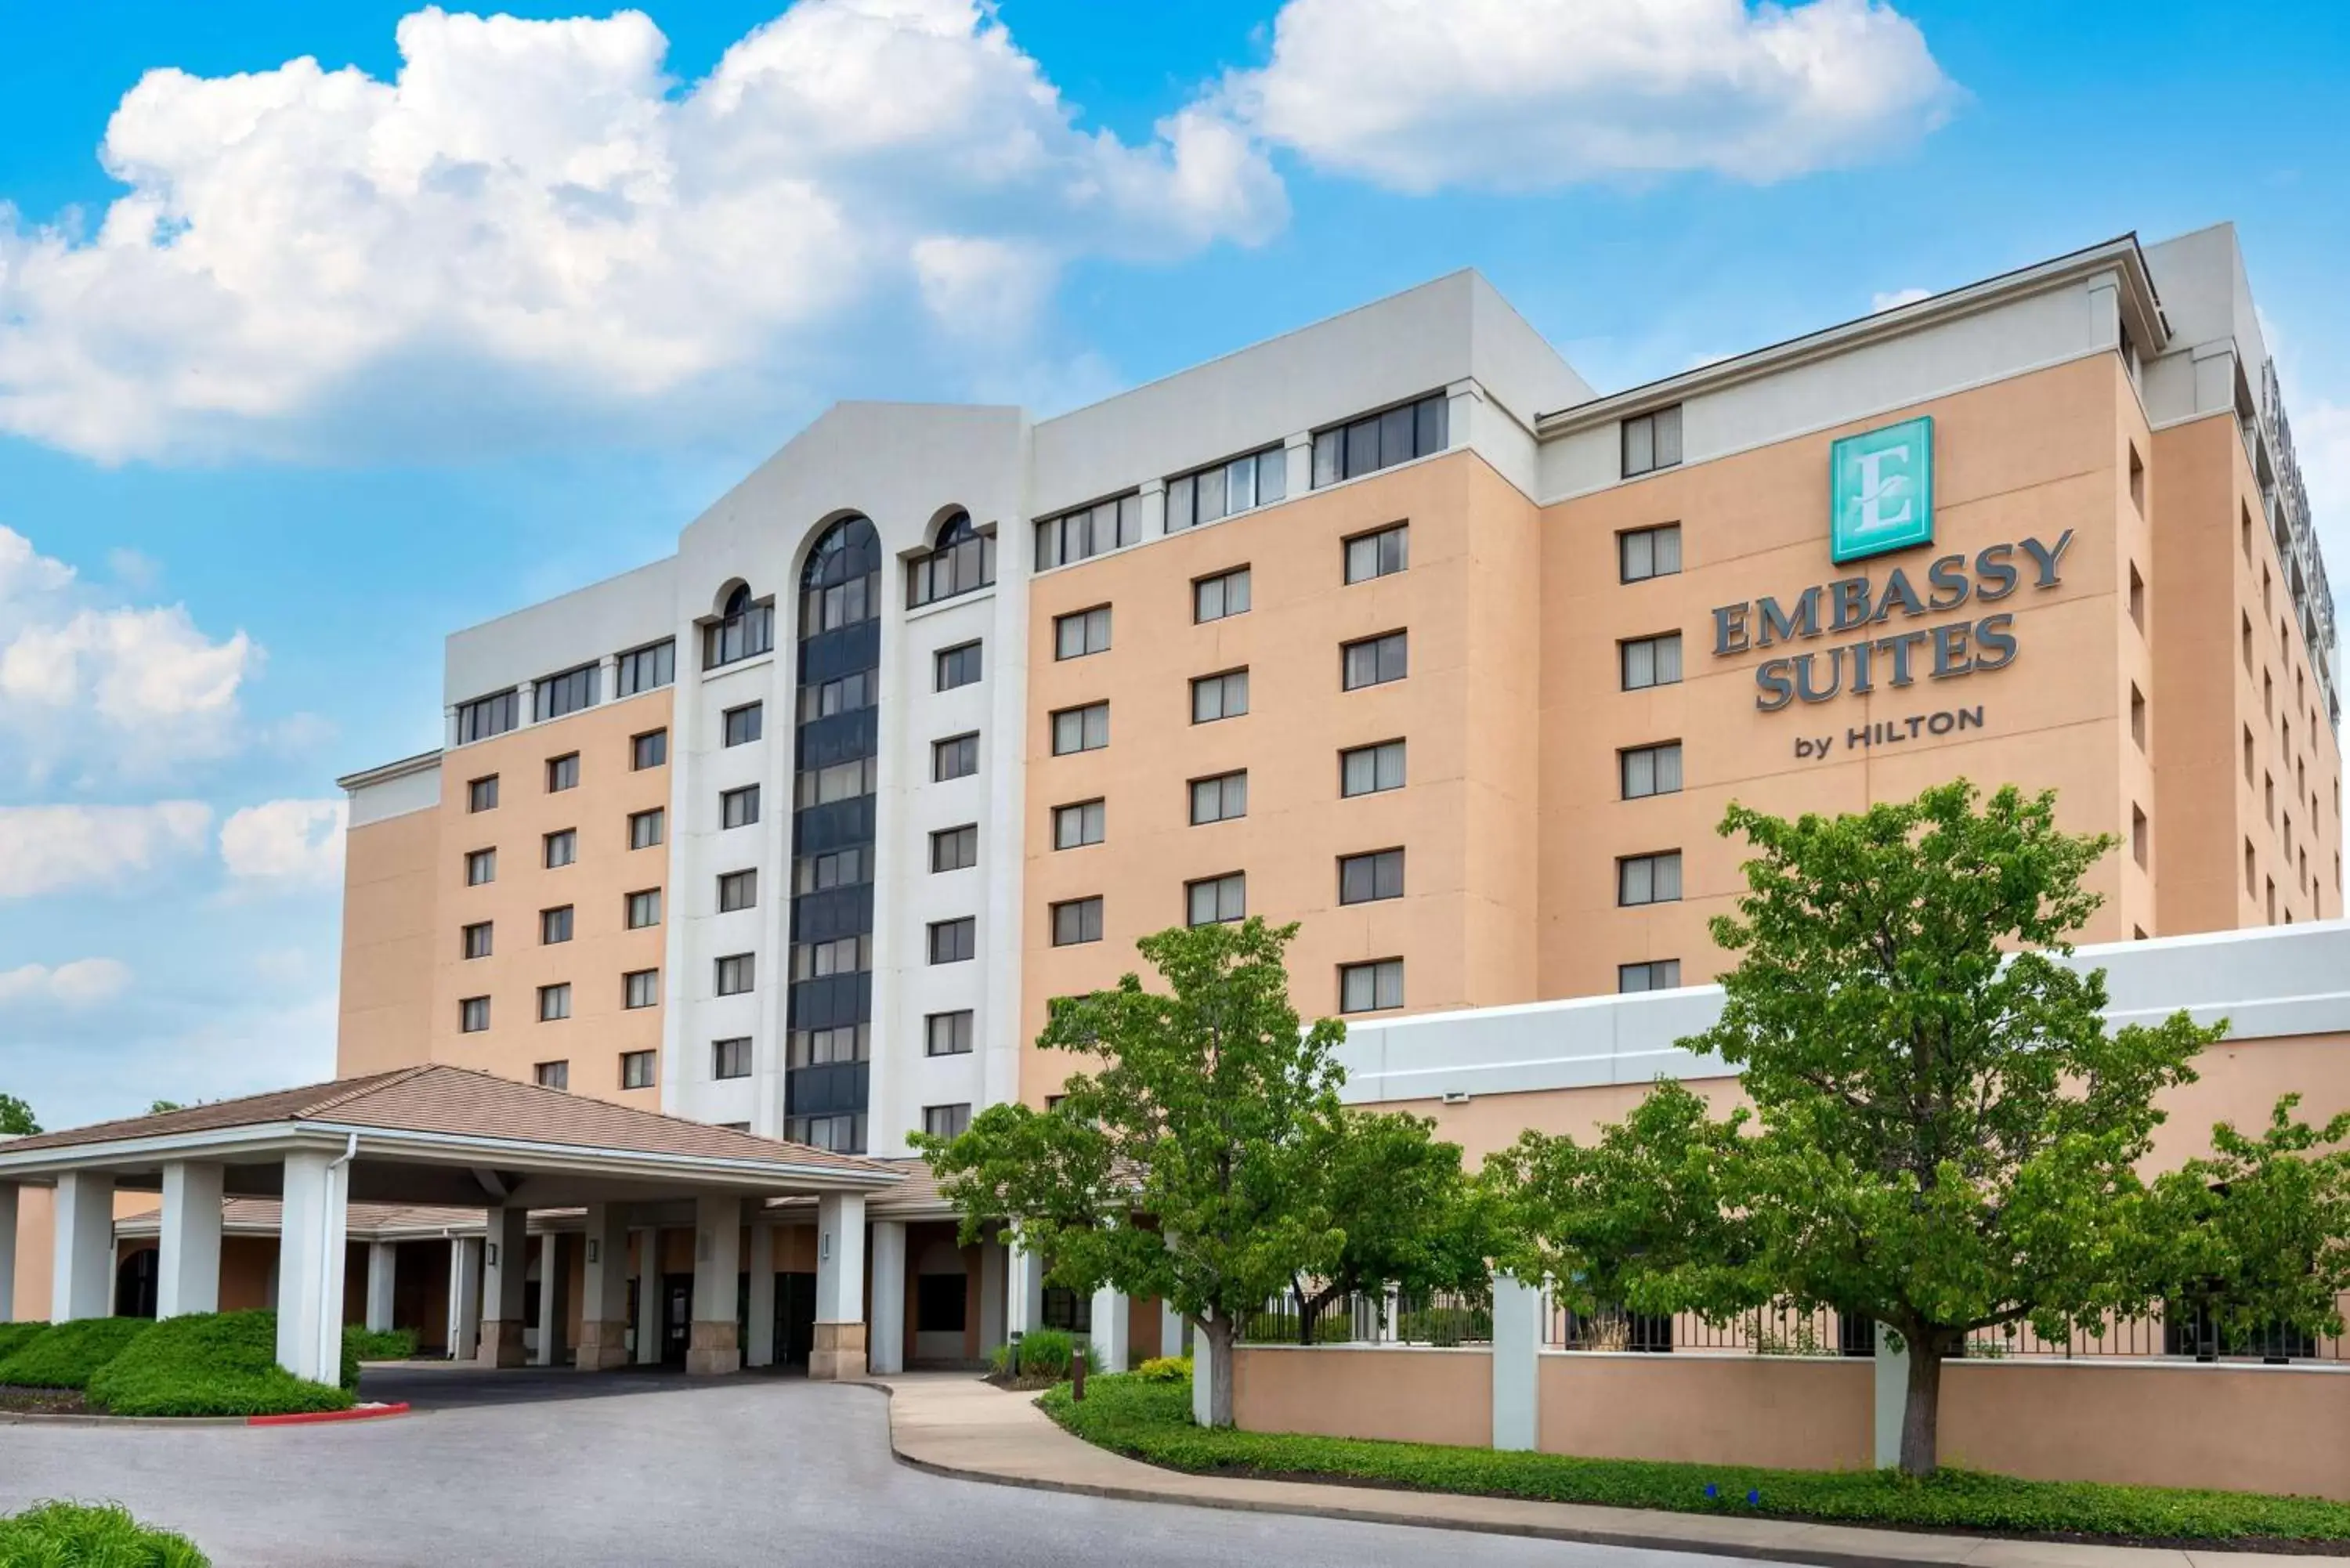 Property Building in Embassy Suites by Hilton Kansas City International Airport